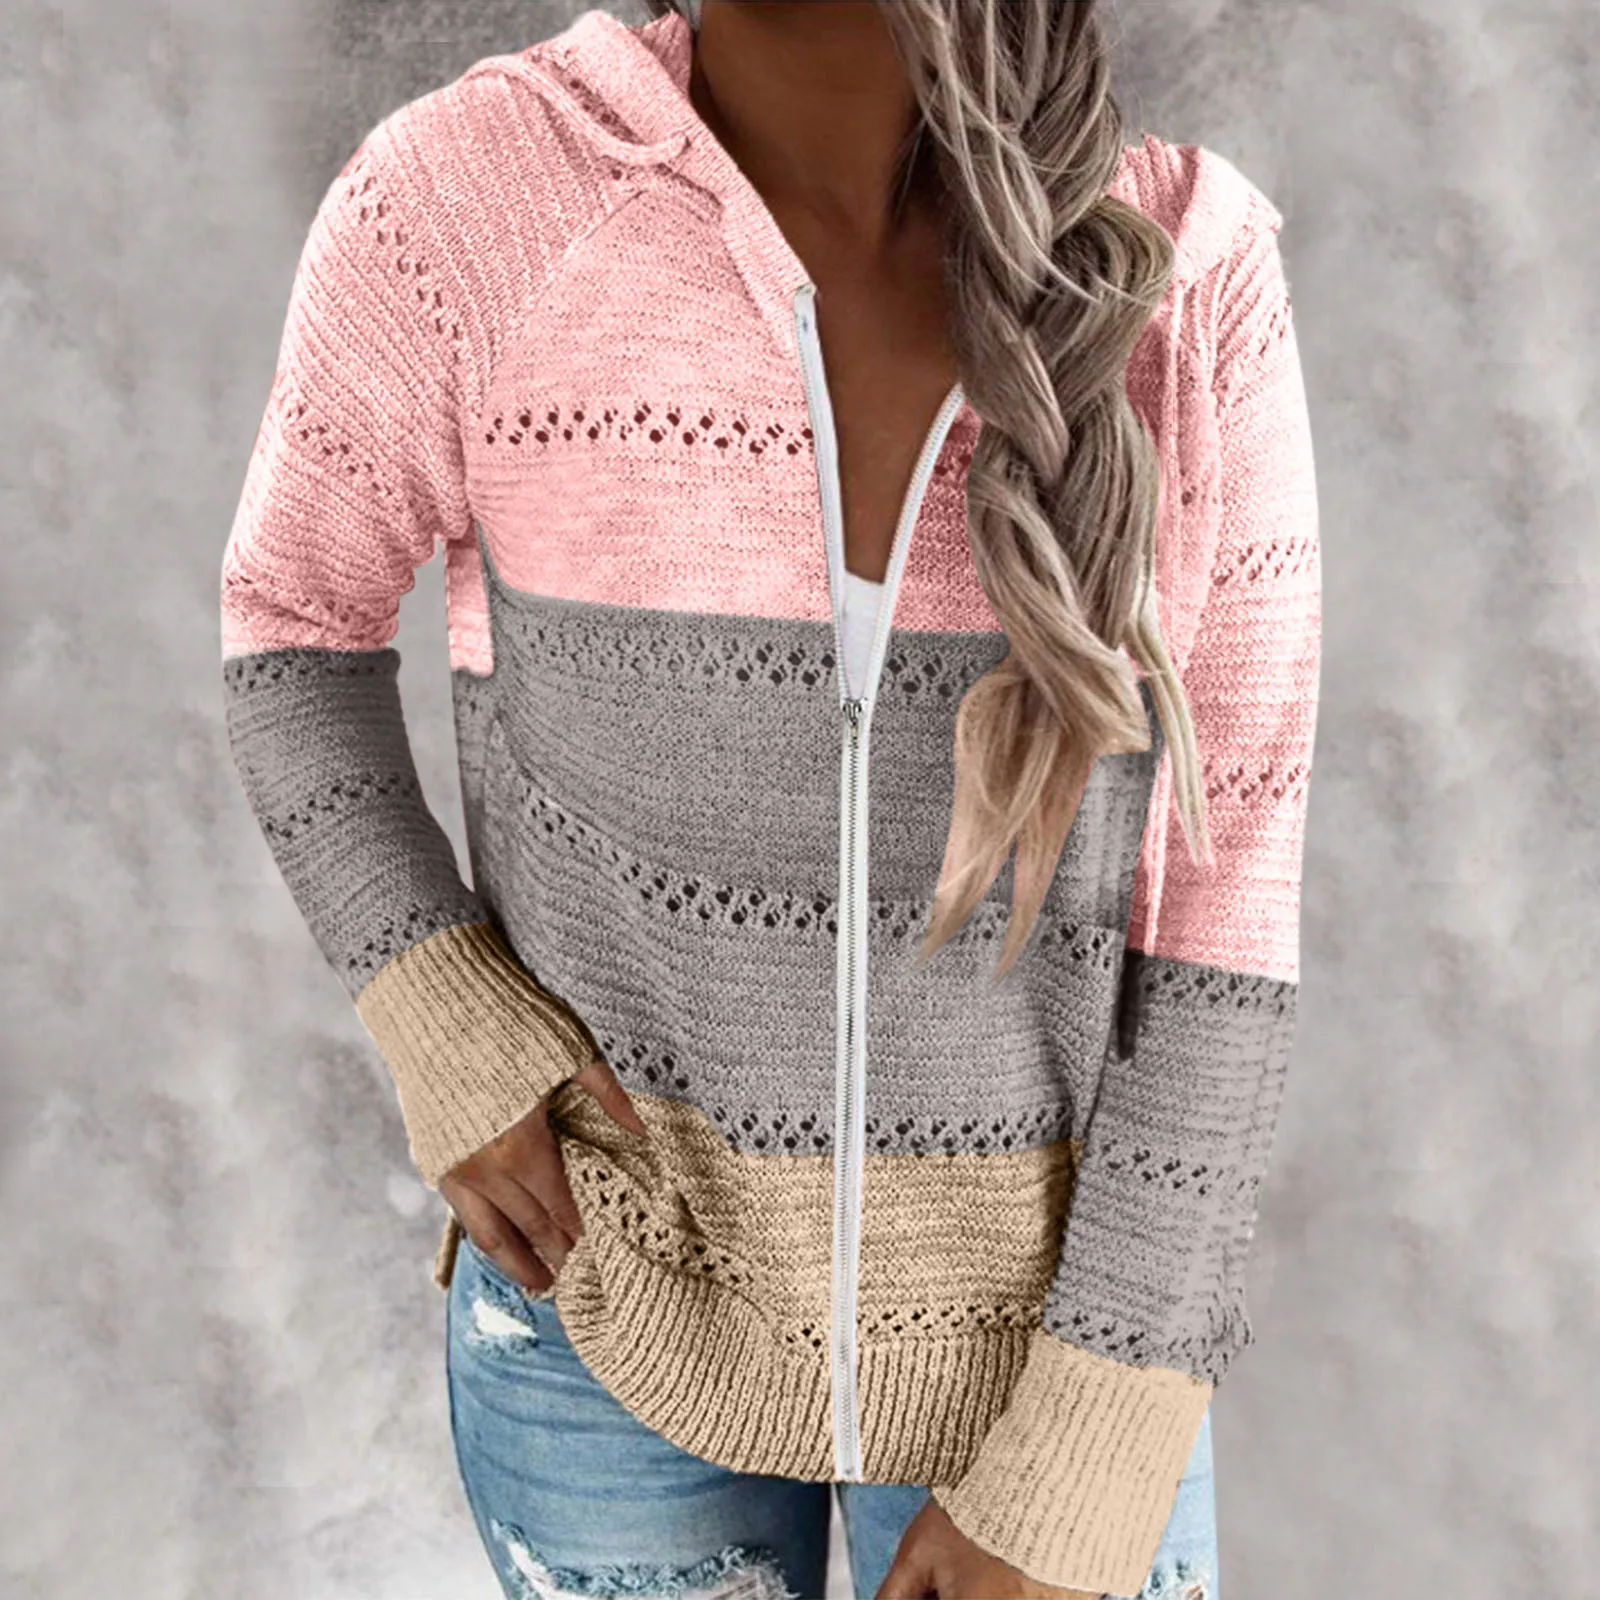 

Fashion Winter Clothes Women Sweater Casual Patchwork V-neck Long Sleeves Hooded Sweater Pull Femme Hiver Sweter Damski sueter